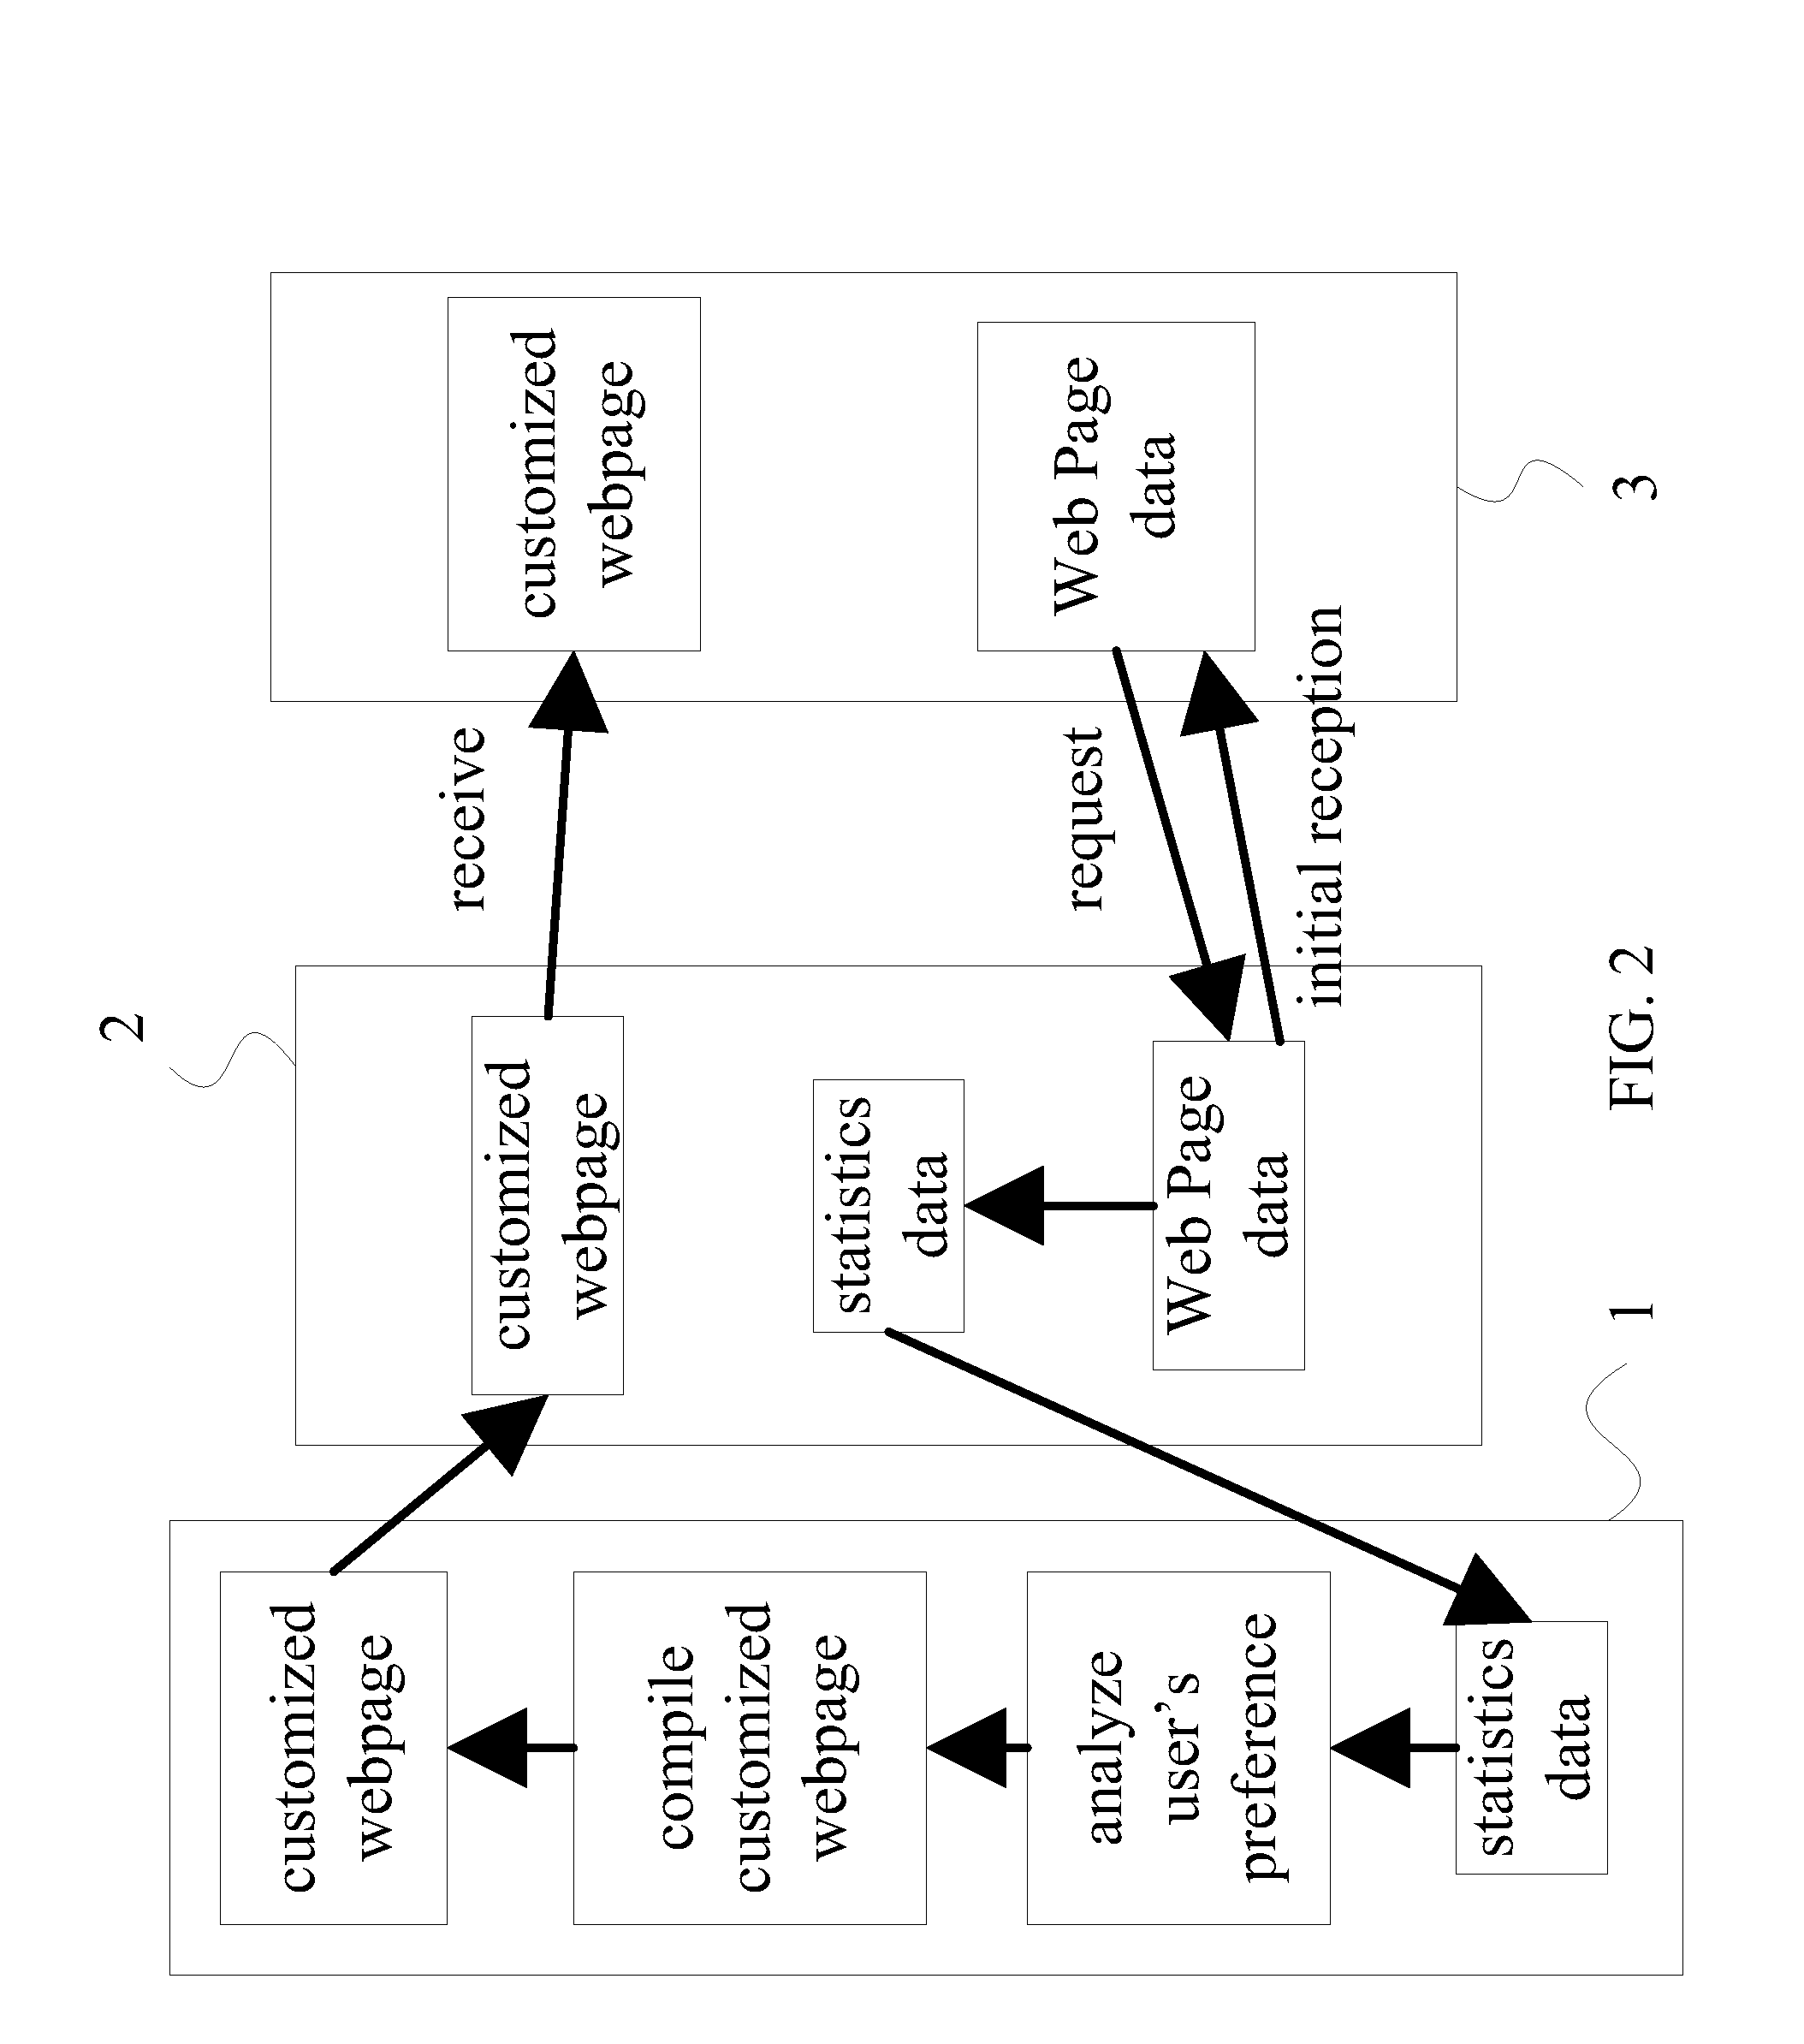 System and method for automatic generation of user-oriented homepage